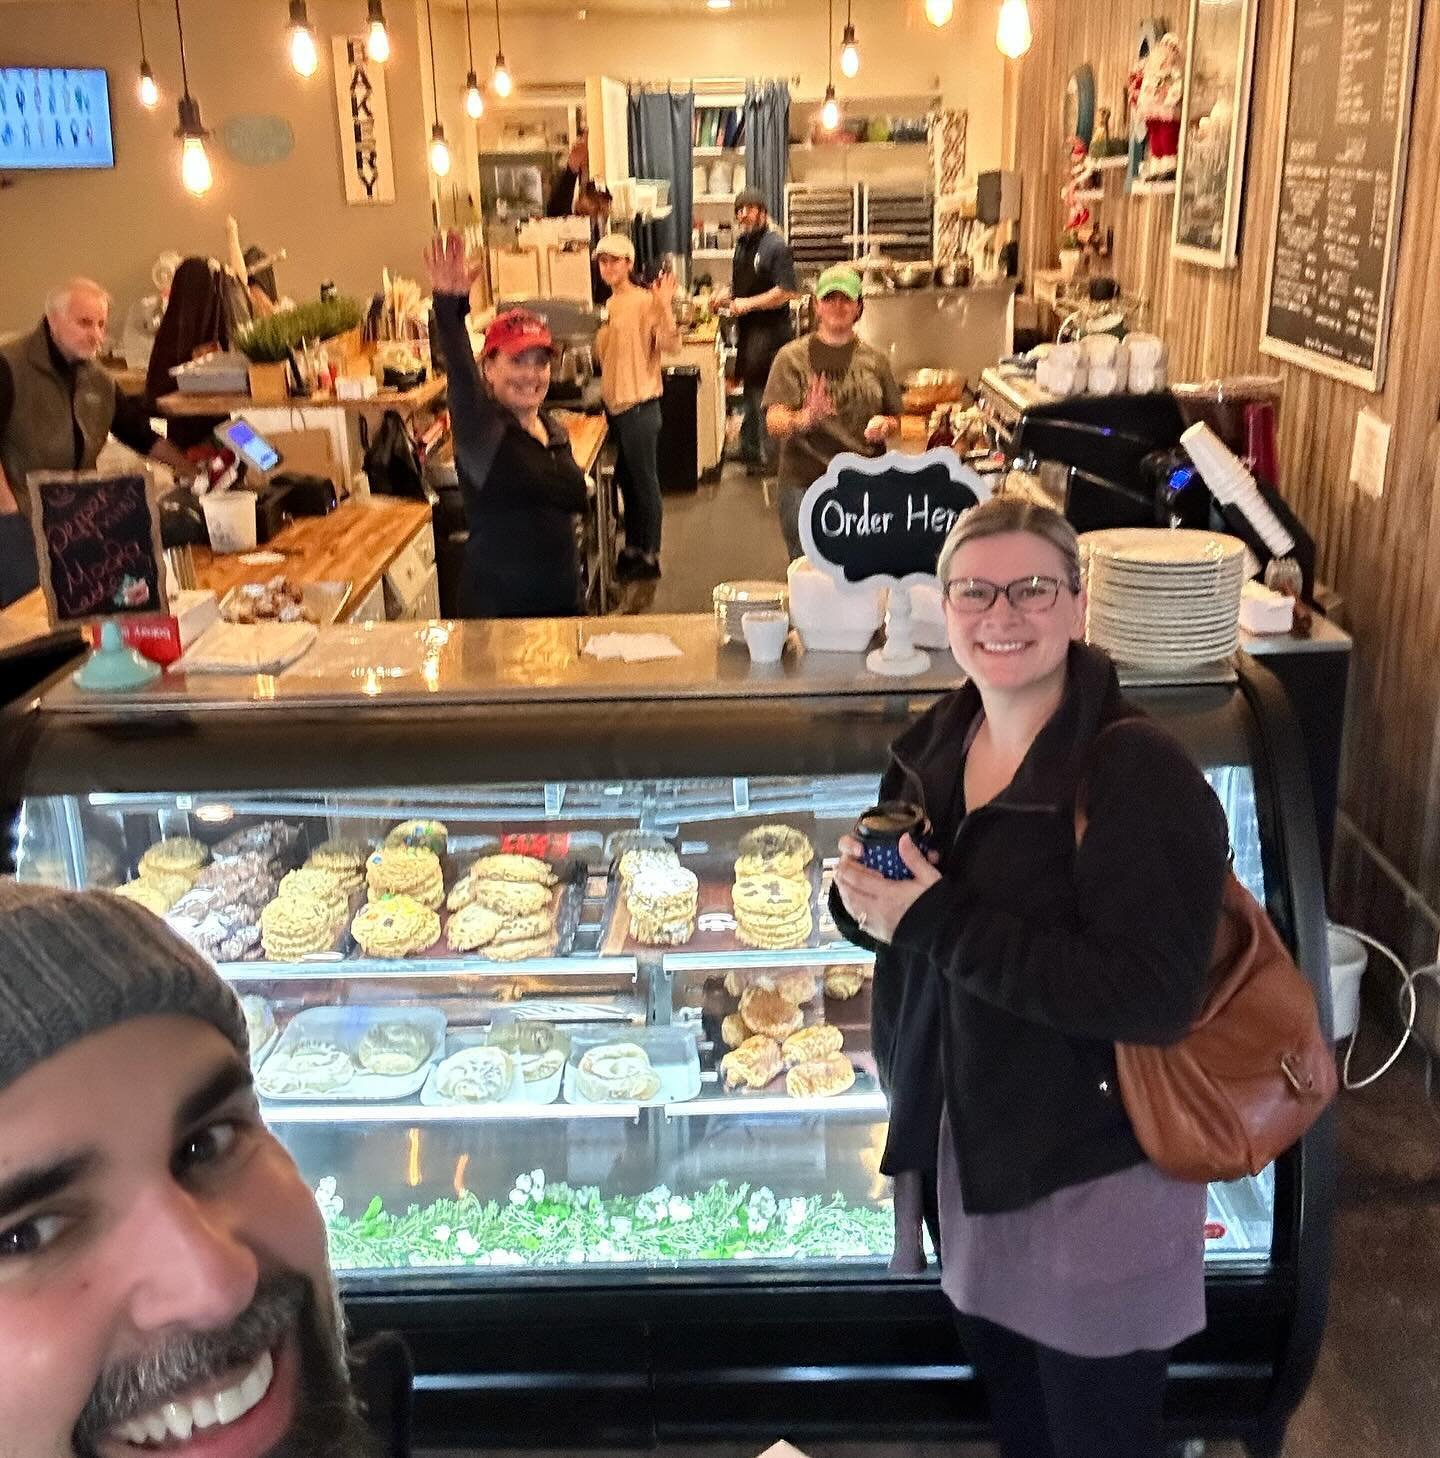 Found this awesome bakery in Olathe Kansas this past summer - Park Street Pastry - hit is again yesterday.  Wonderful wonderful people and awesome Cinnamon rolls and croissants.  See you all next summer!